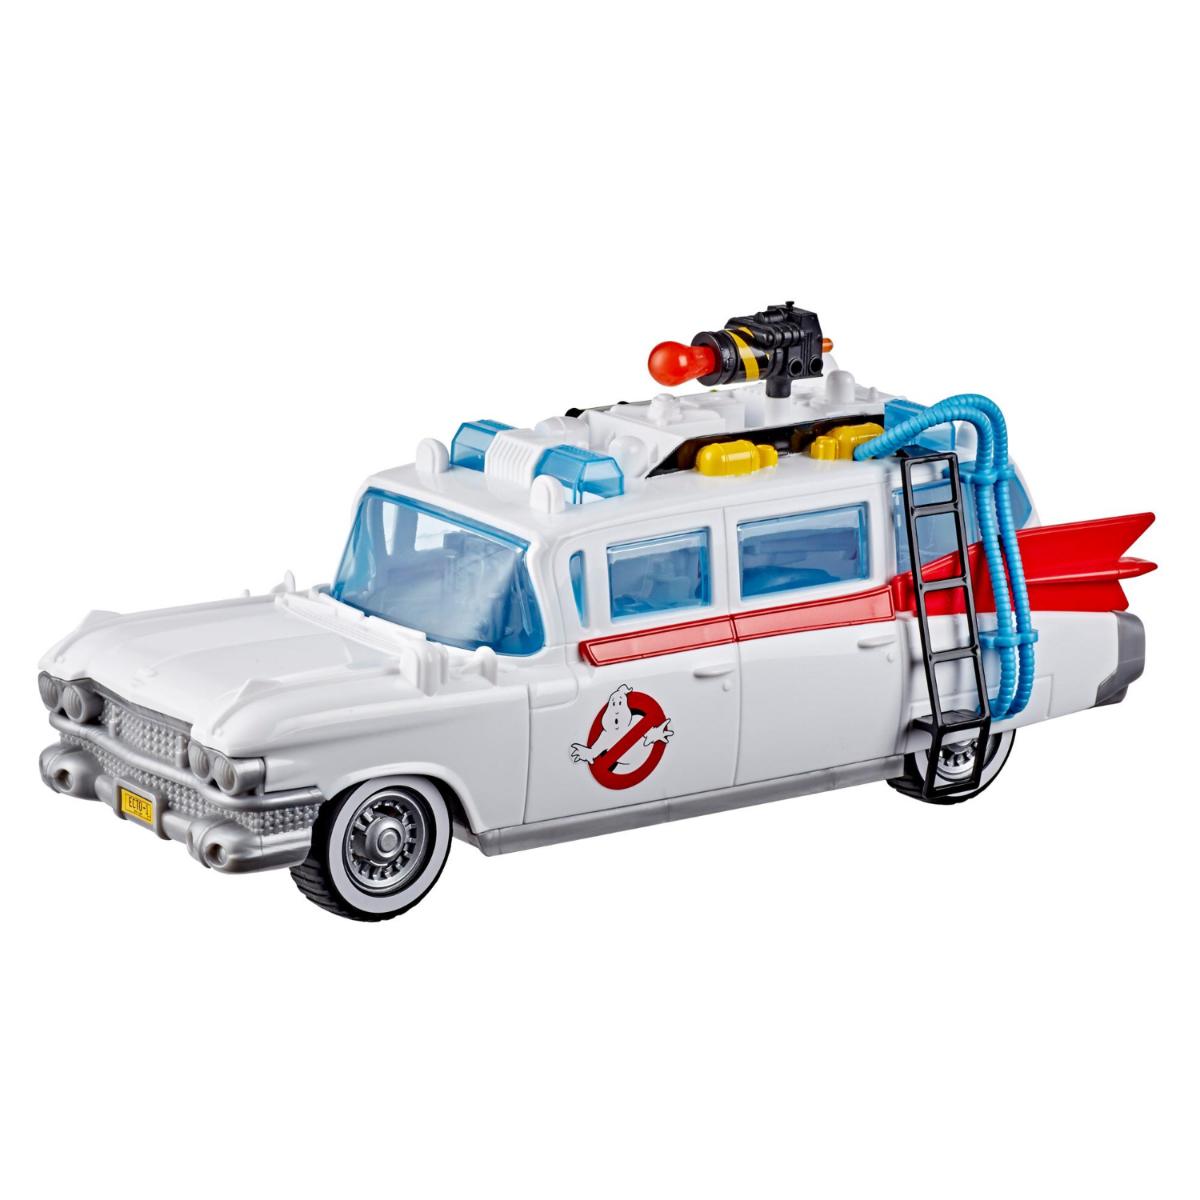 GHOSTBUSTERS VEHICULO ECTO 1